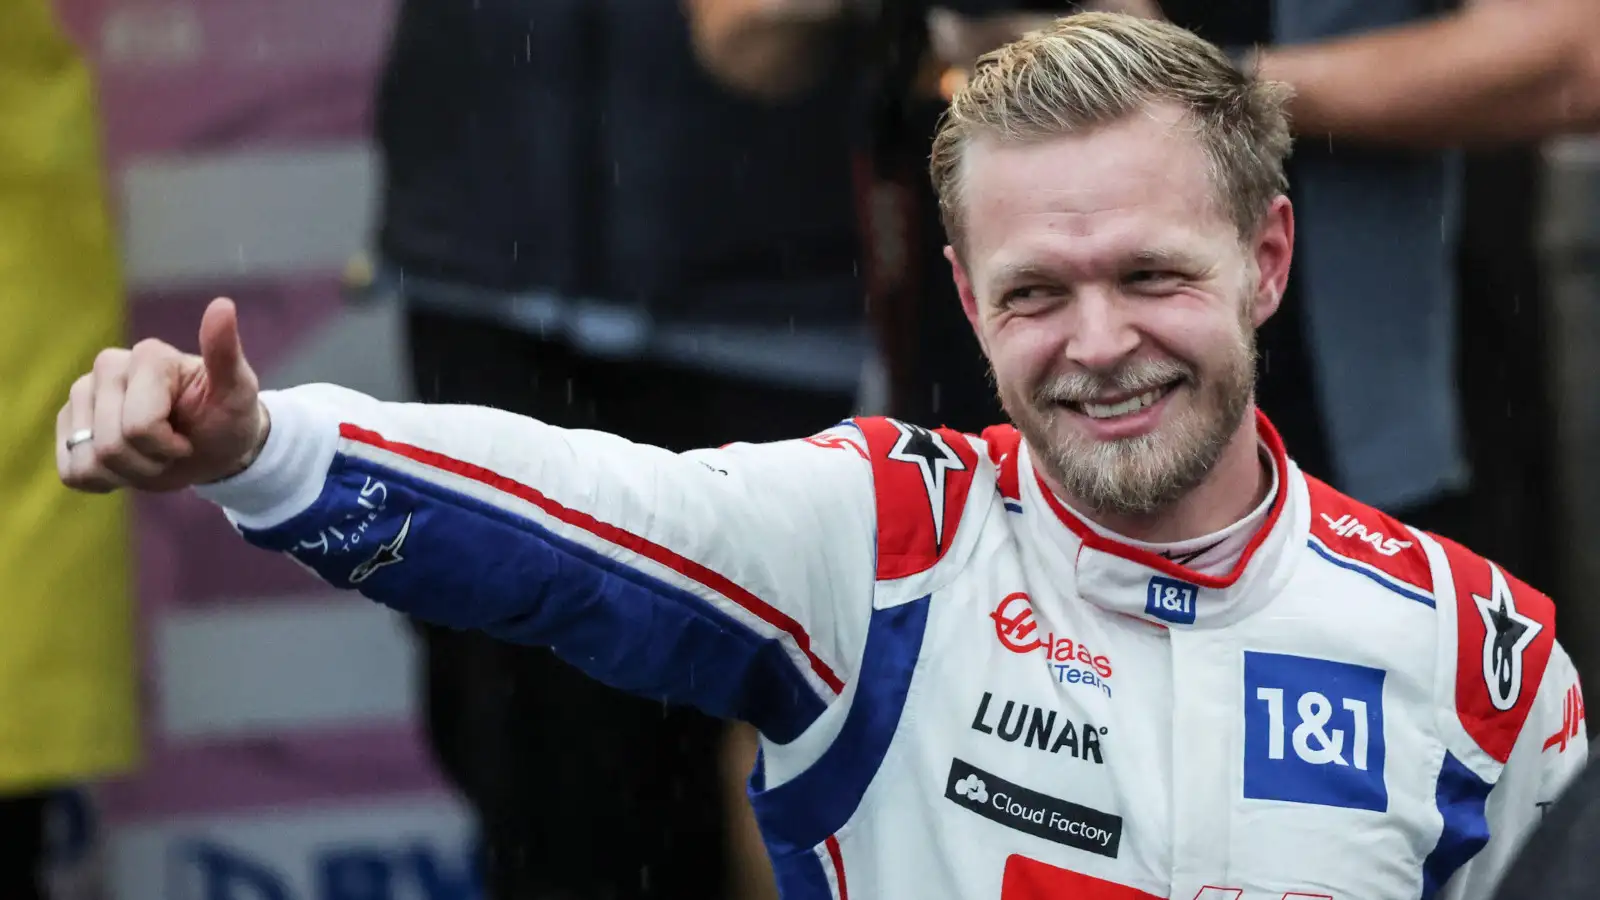 Kevin Magnussen - F1 Driver for Haas